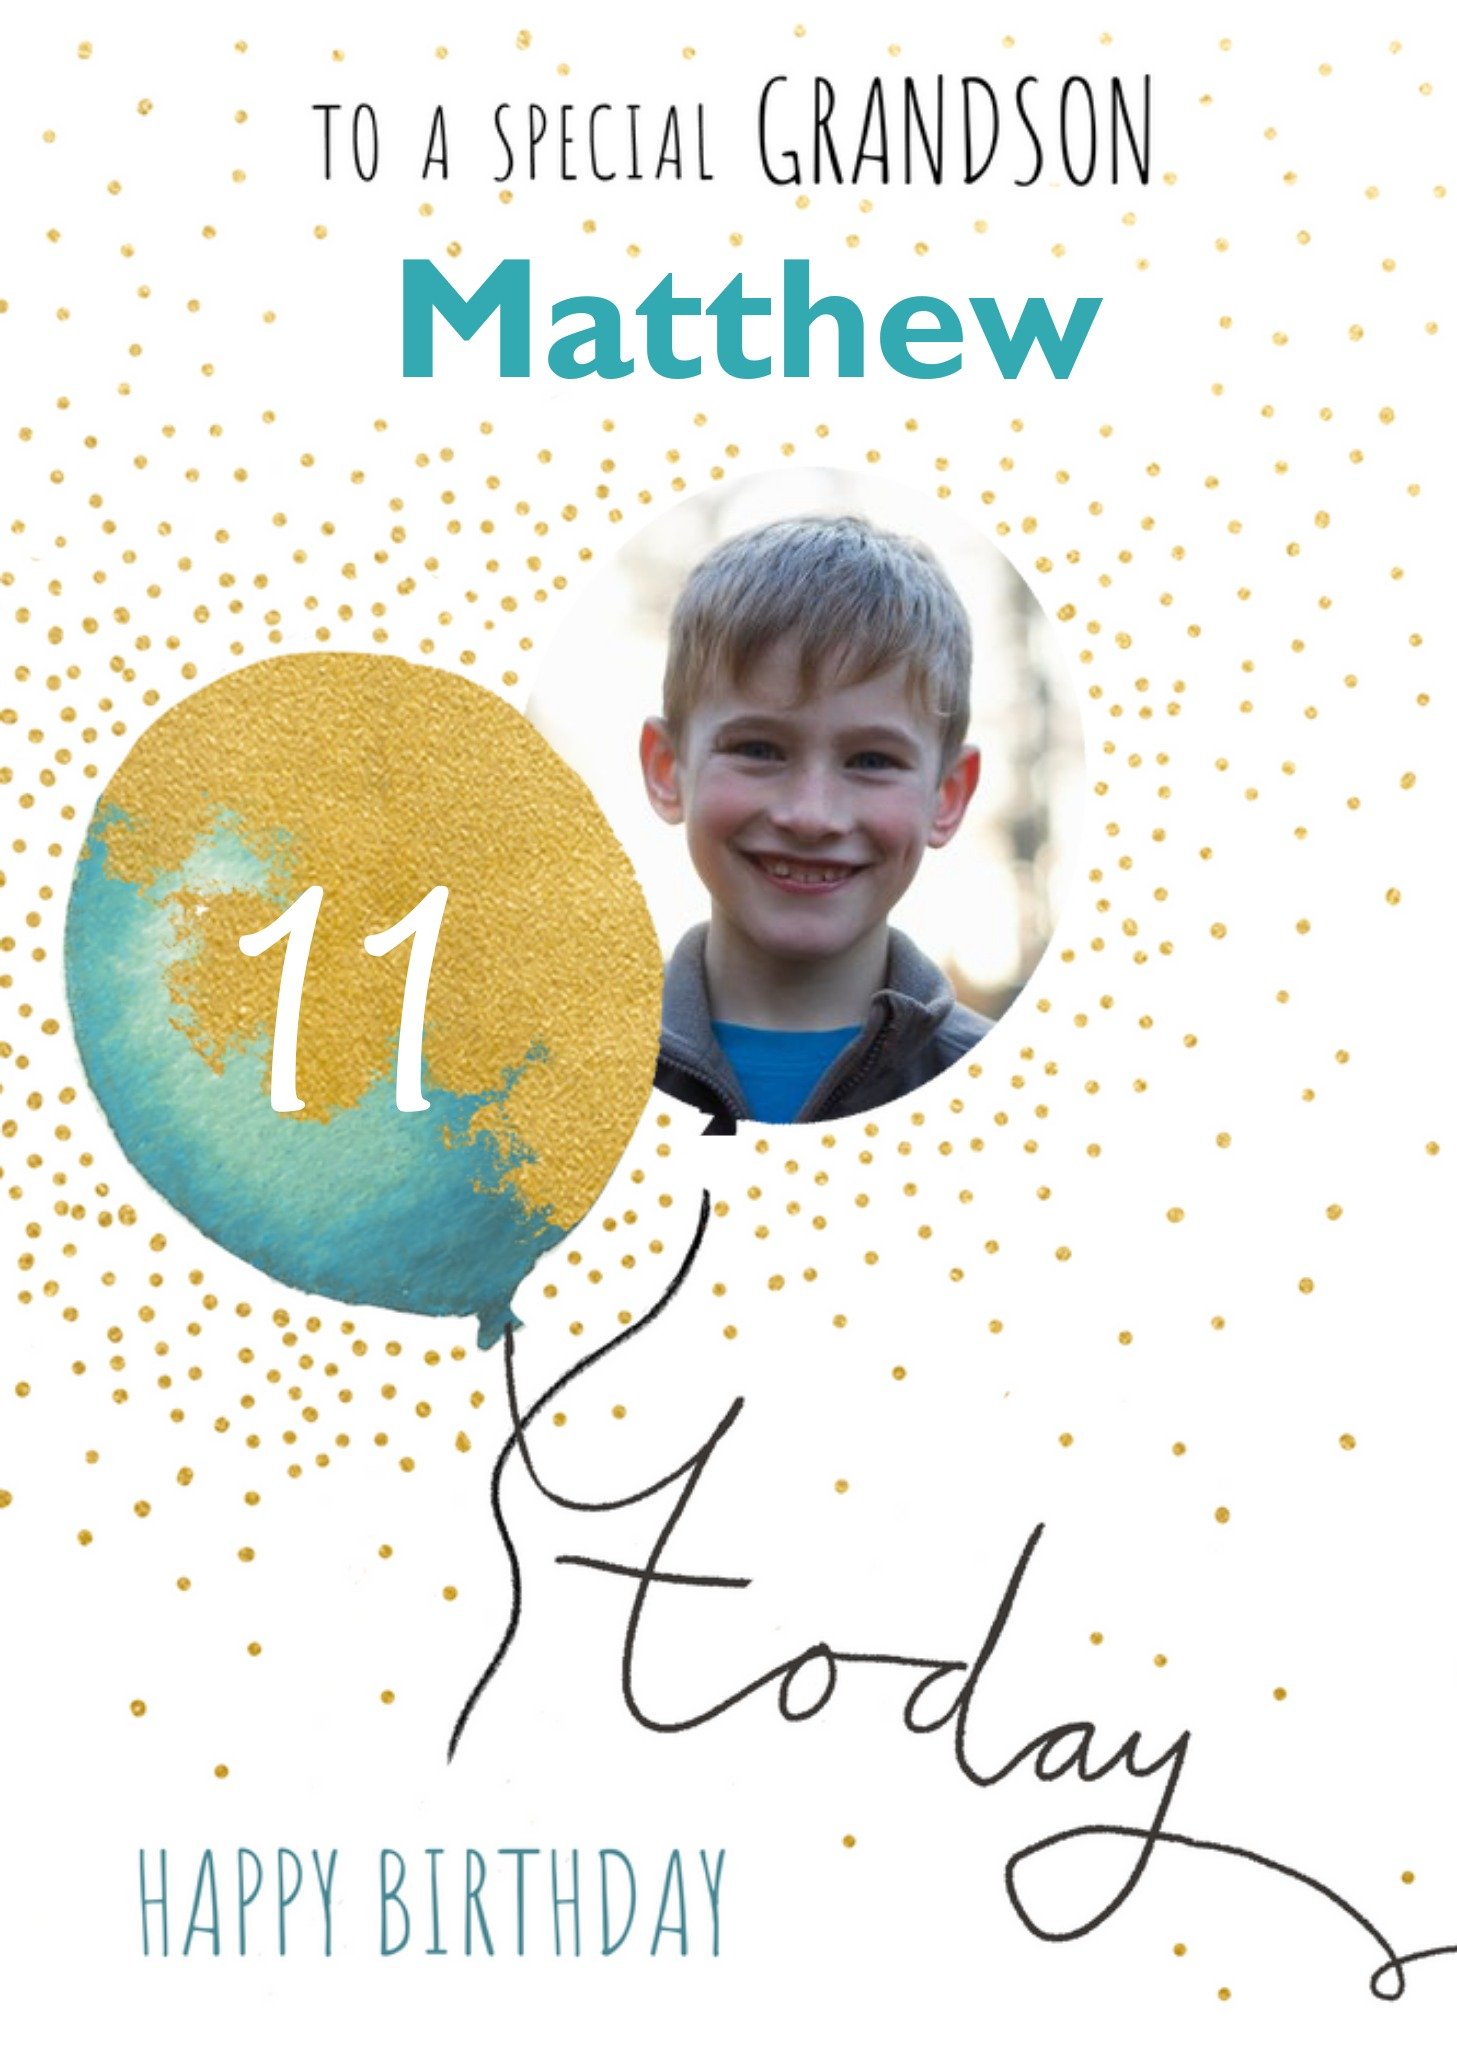 Ling Design Illustration Of A Blue Balloon Surrounded By Glitter Grandson's Eleventh Birthday Photo 